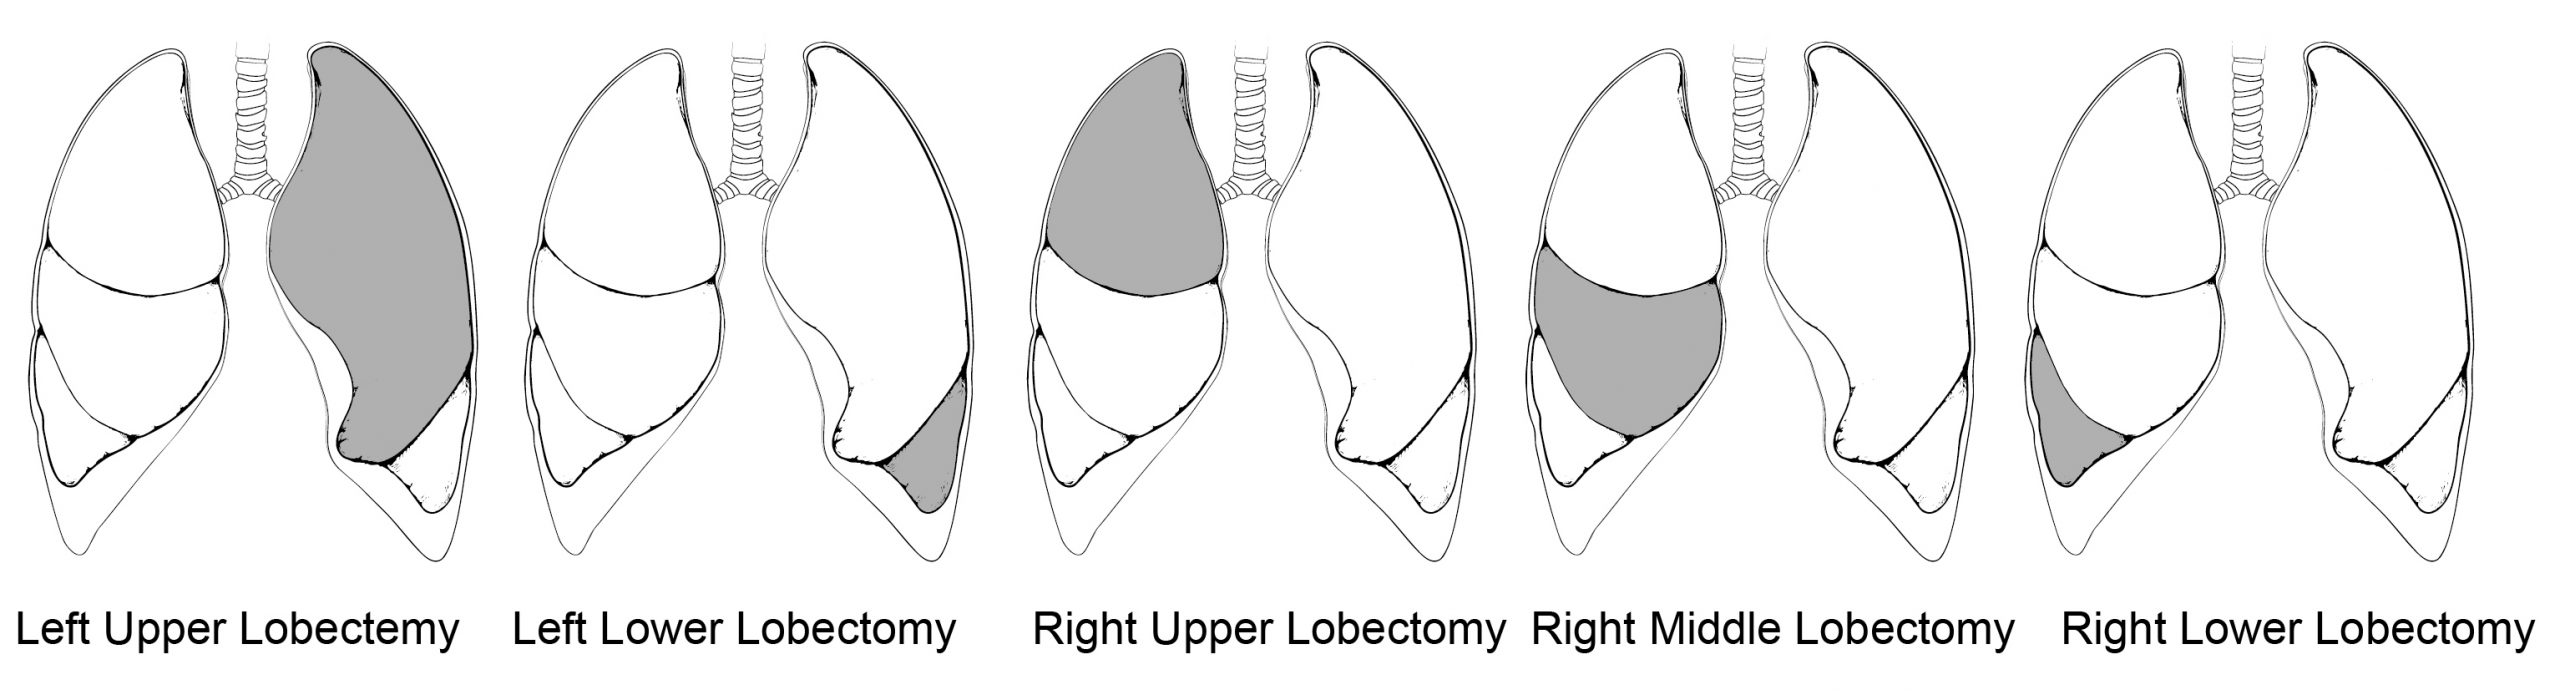 Illustration of four sets of lungs, each showing a lobectemy in a different region of the lung.